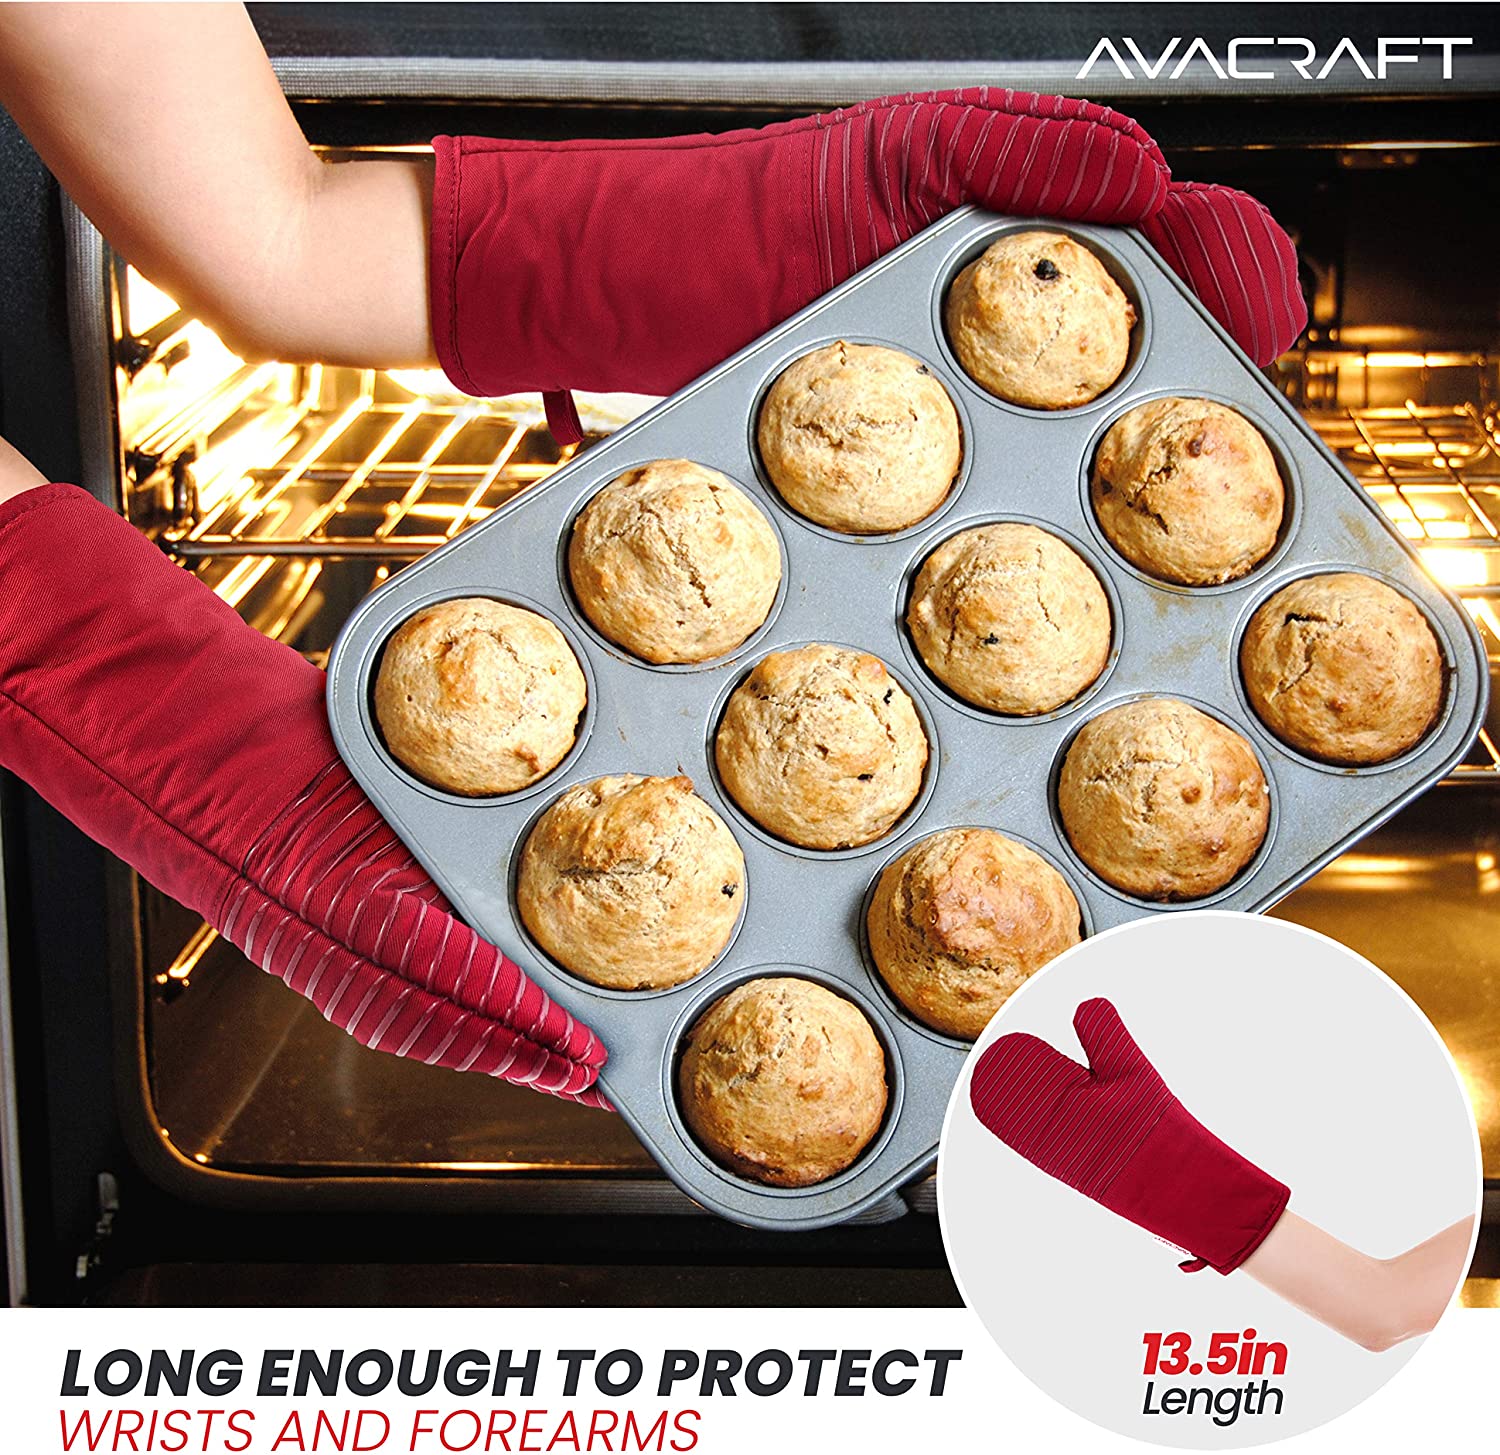 AVACRAFT Oven Mitts Pair, Flexible, 100% Cotton with Heat Resistant Food Grade Silicone, Thick Terrycloth Interior, 500 F Heat Resistant (Red Oven Mitts)